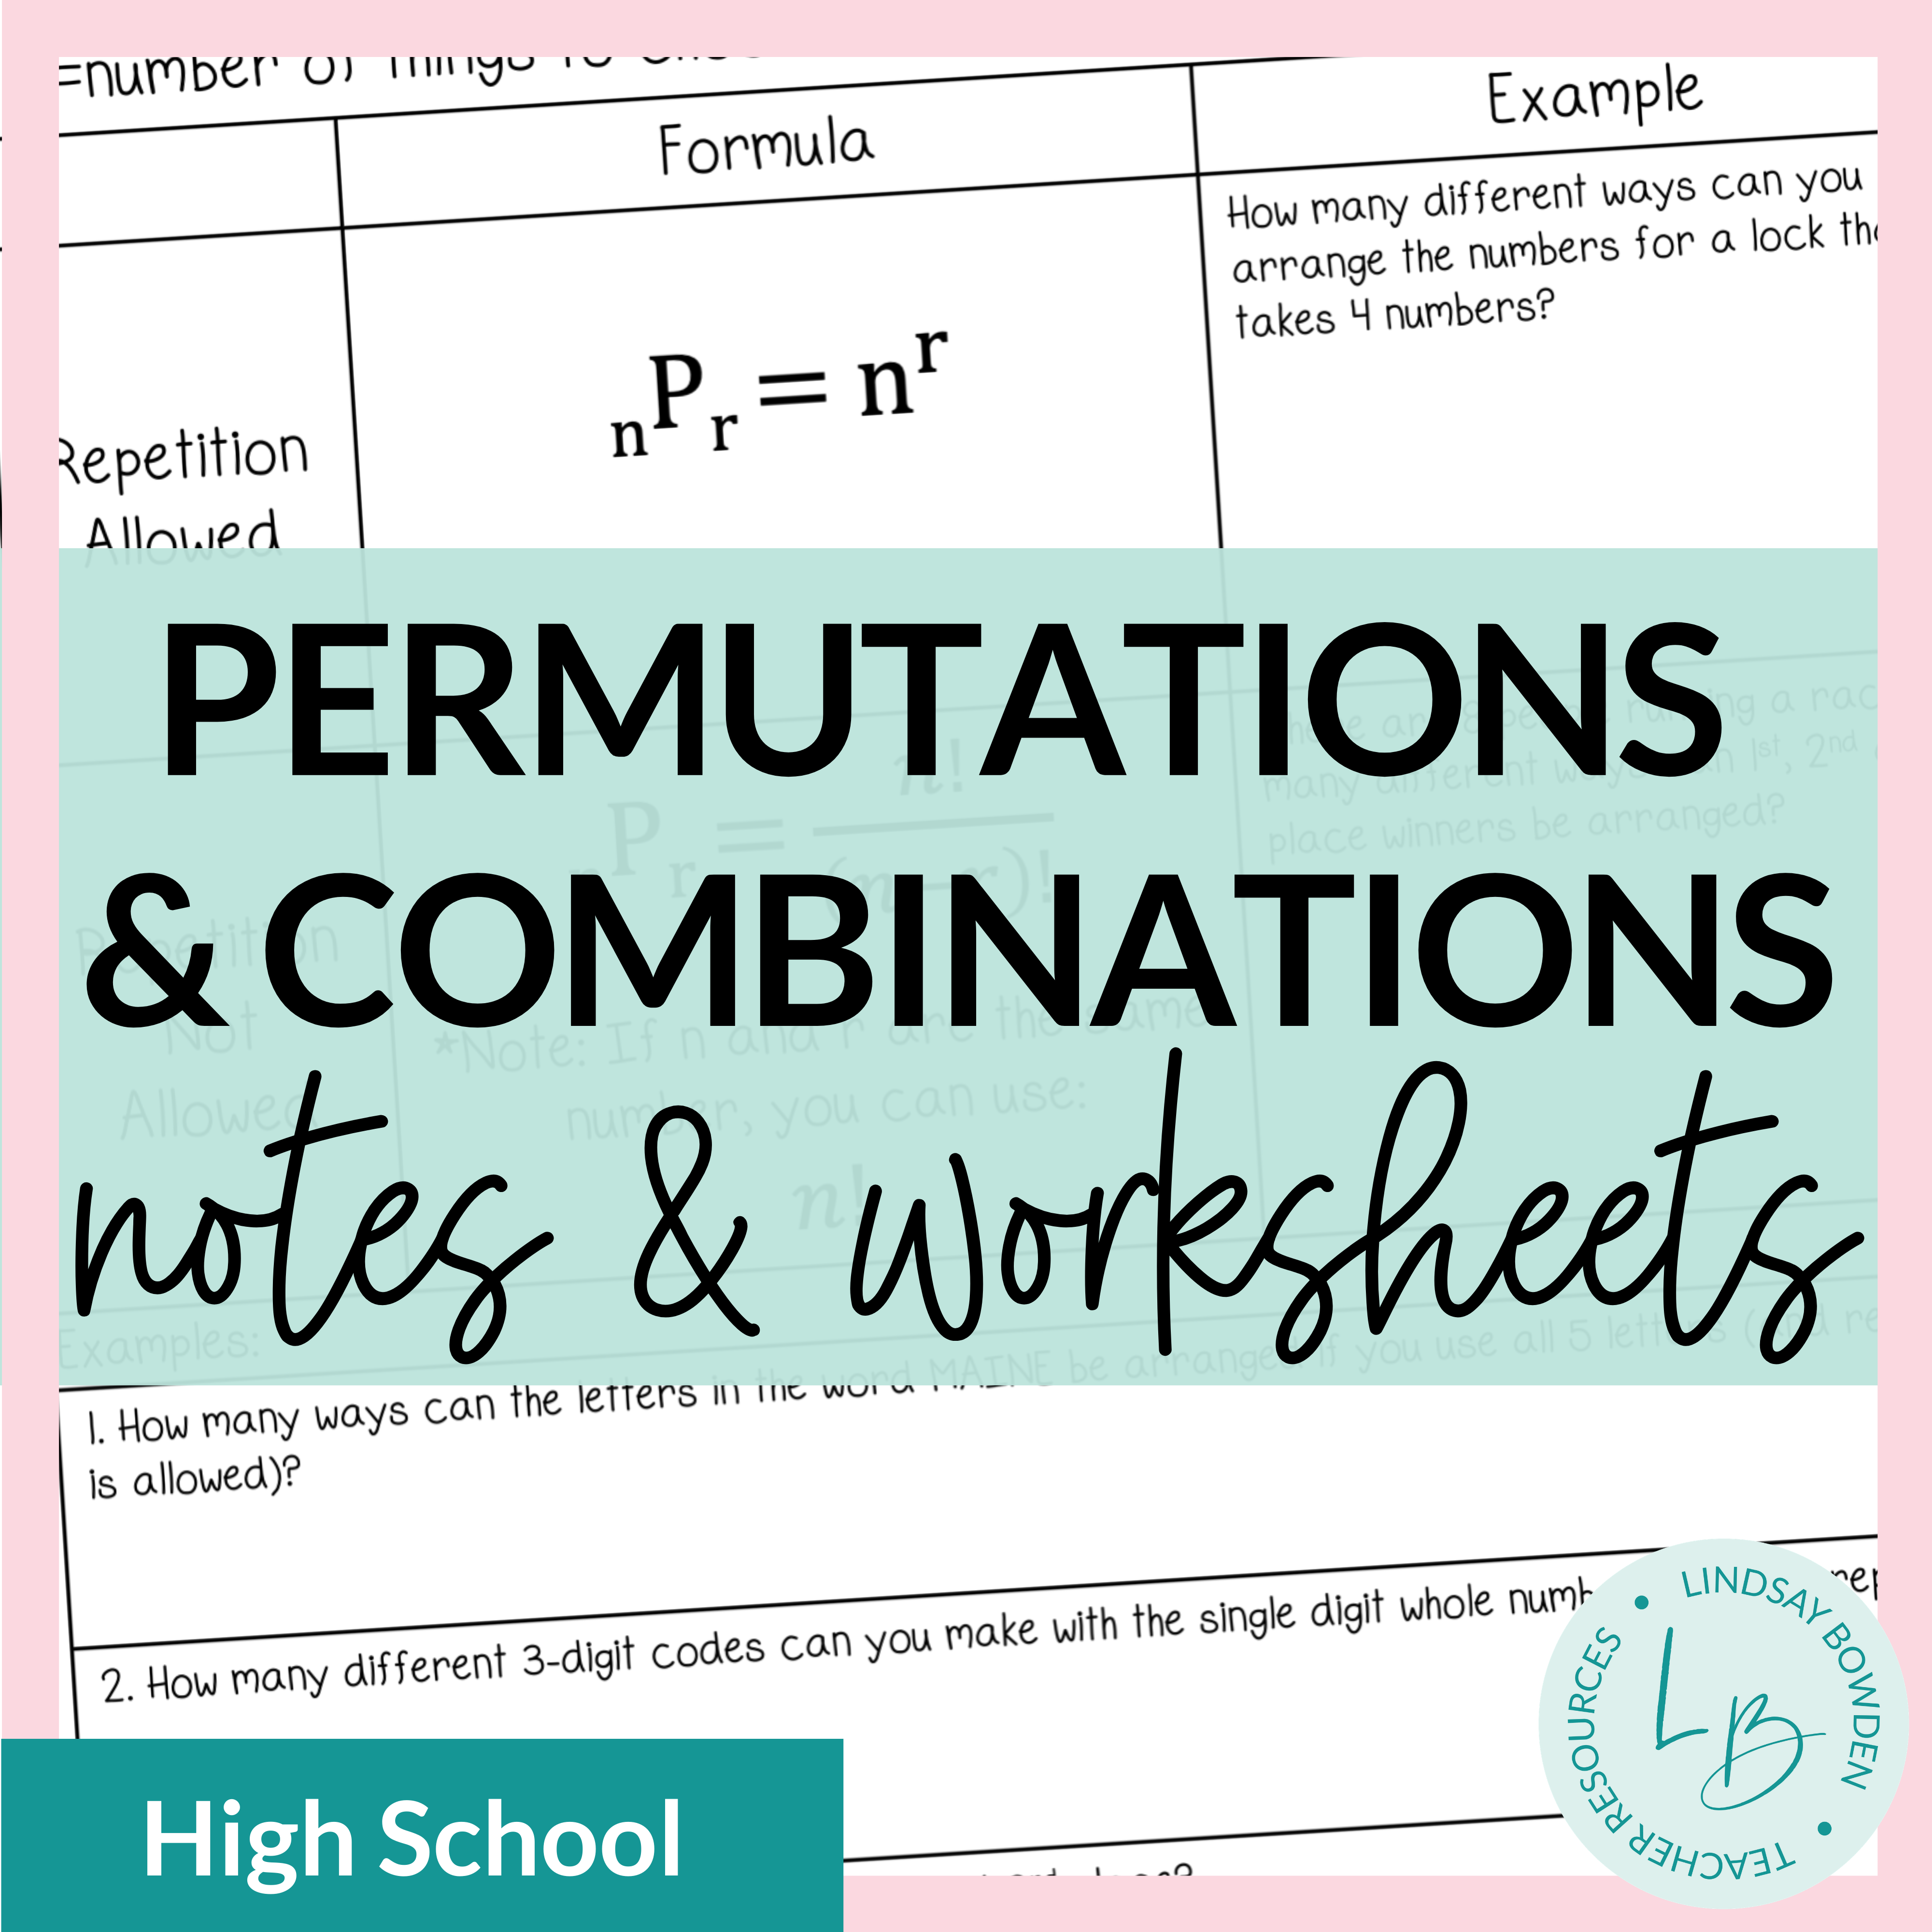 permutations-and-combinations-worksheet-answers